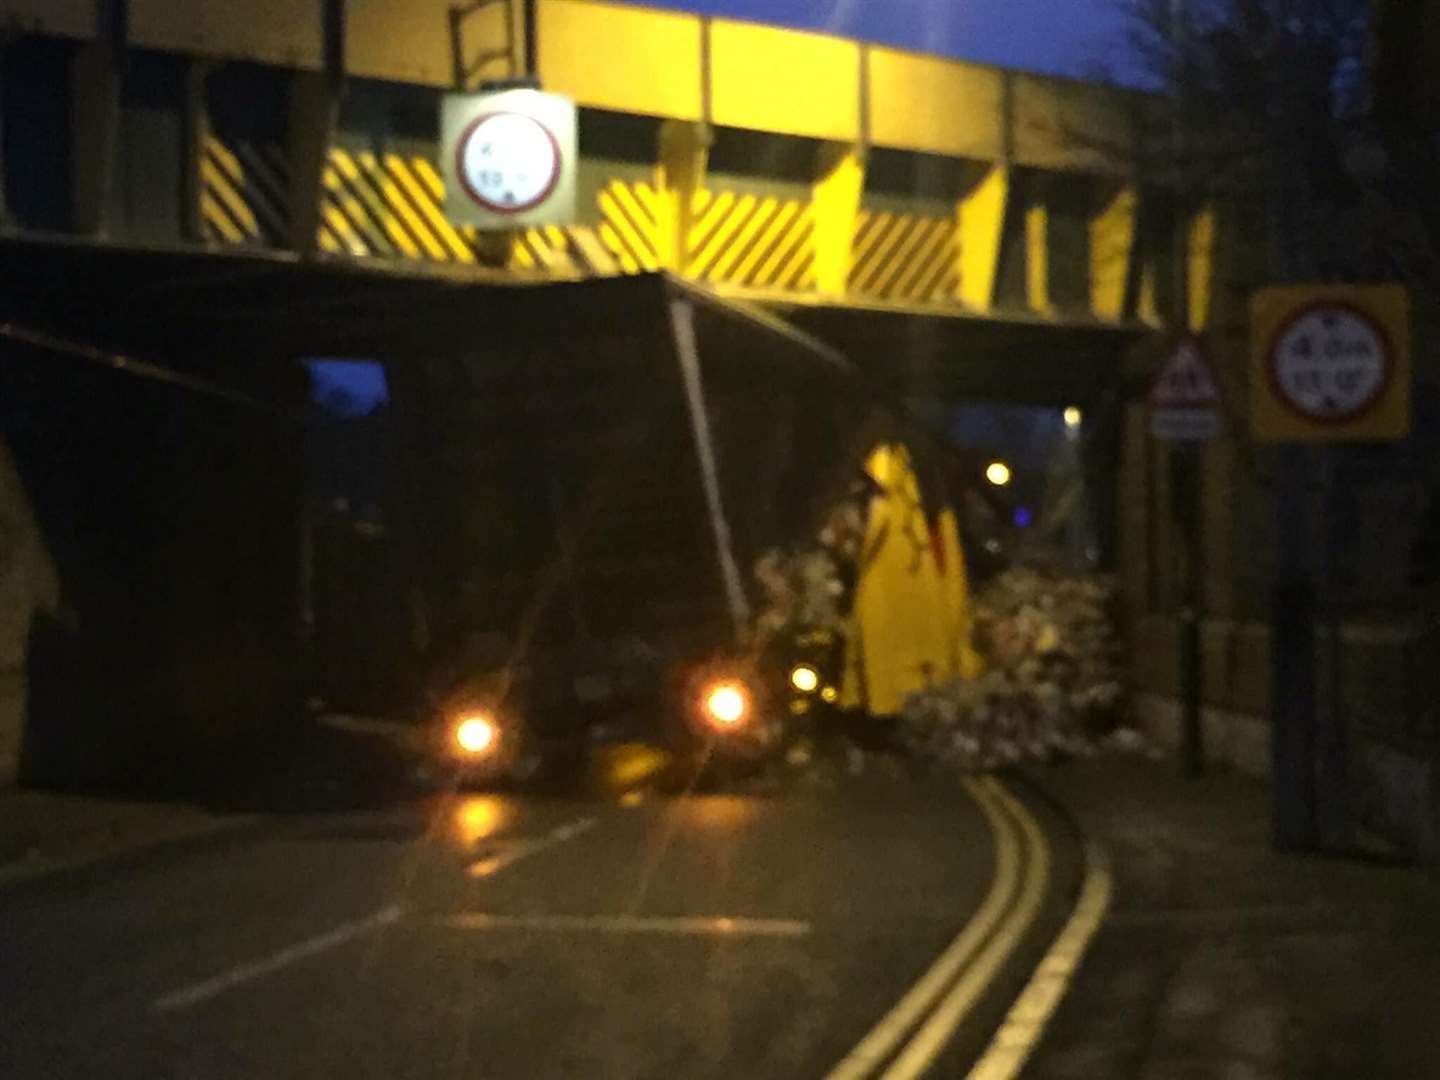 The lorry has hit a bridge on Gun Lane in Strood. Picture: @ItsLewis7592